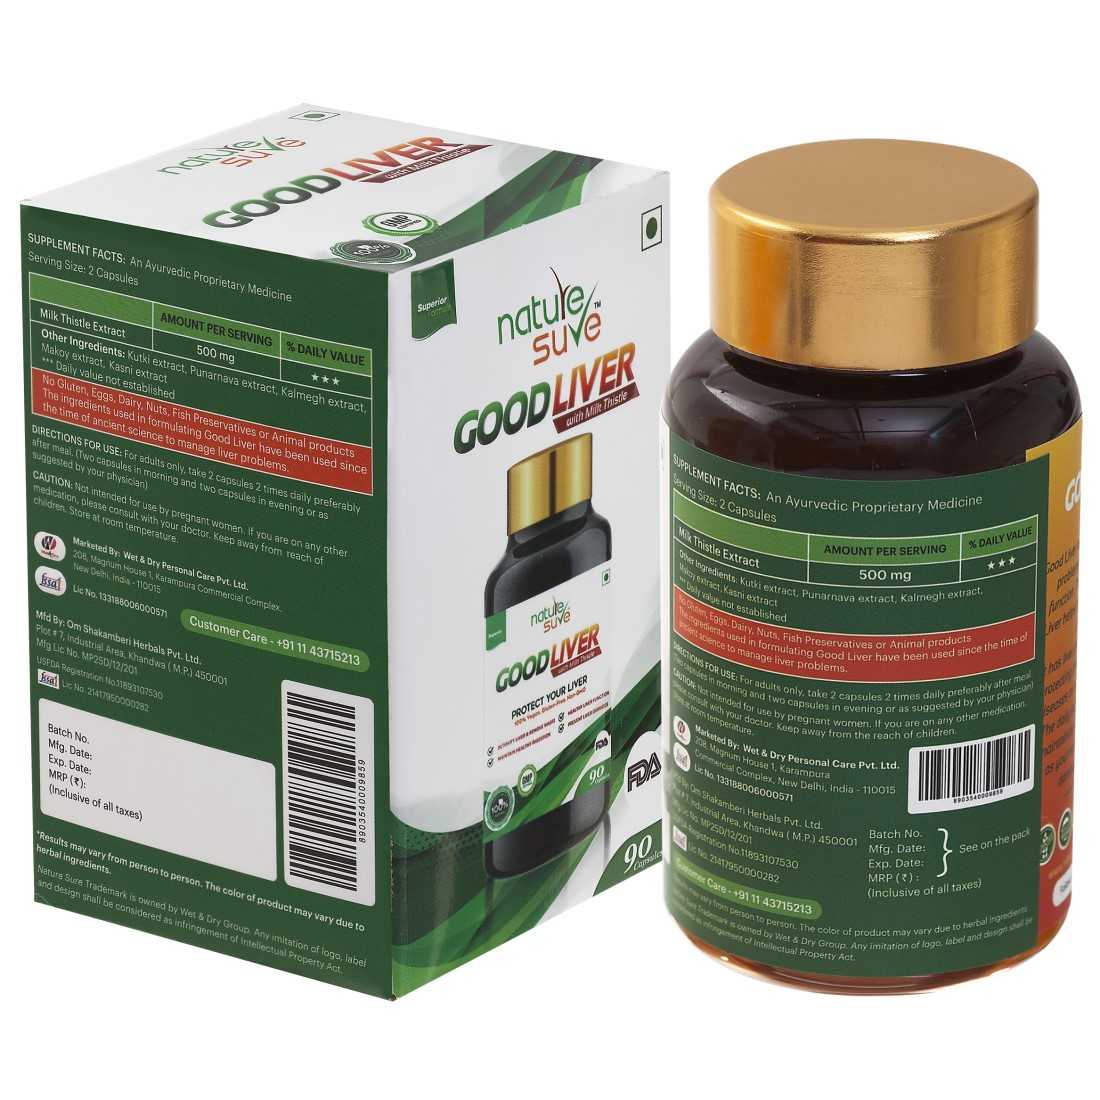 Nature Sure Tablets Nature Sure Good Liver Capsules With Milk Thistle for Fatty & Non-Fatty Liver Health